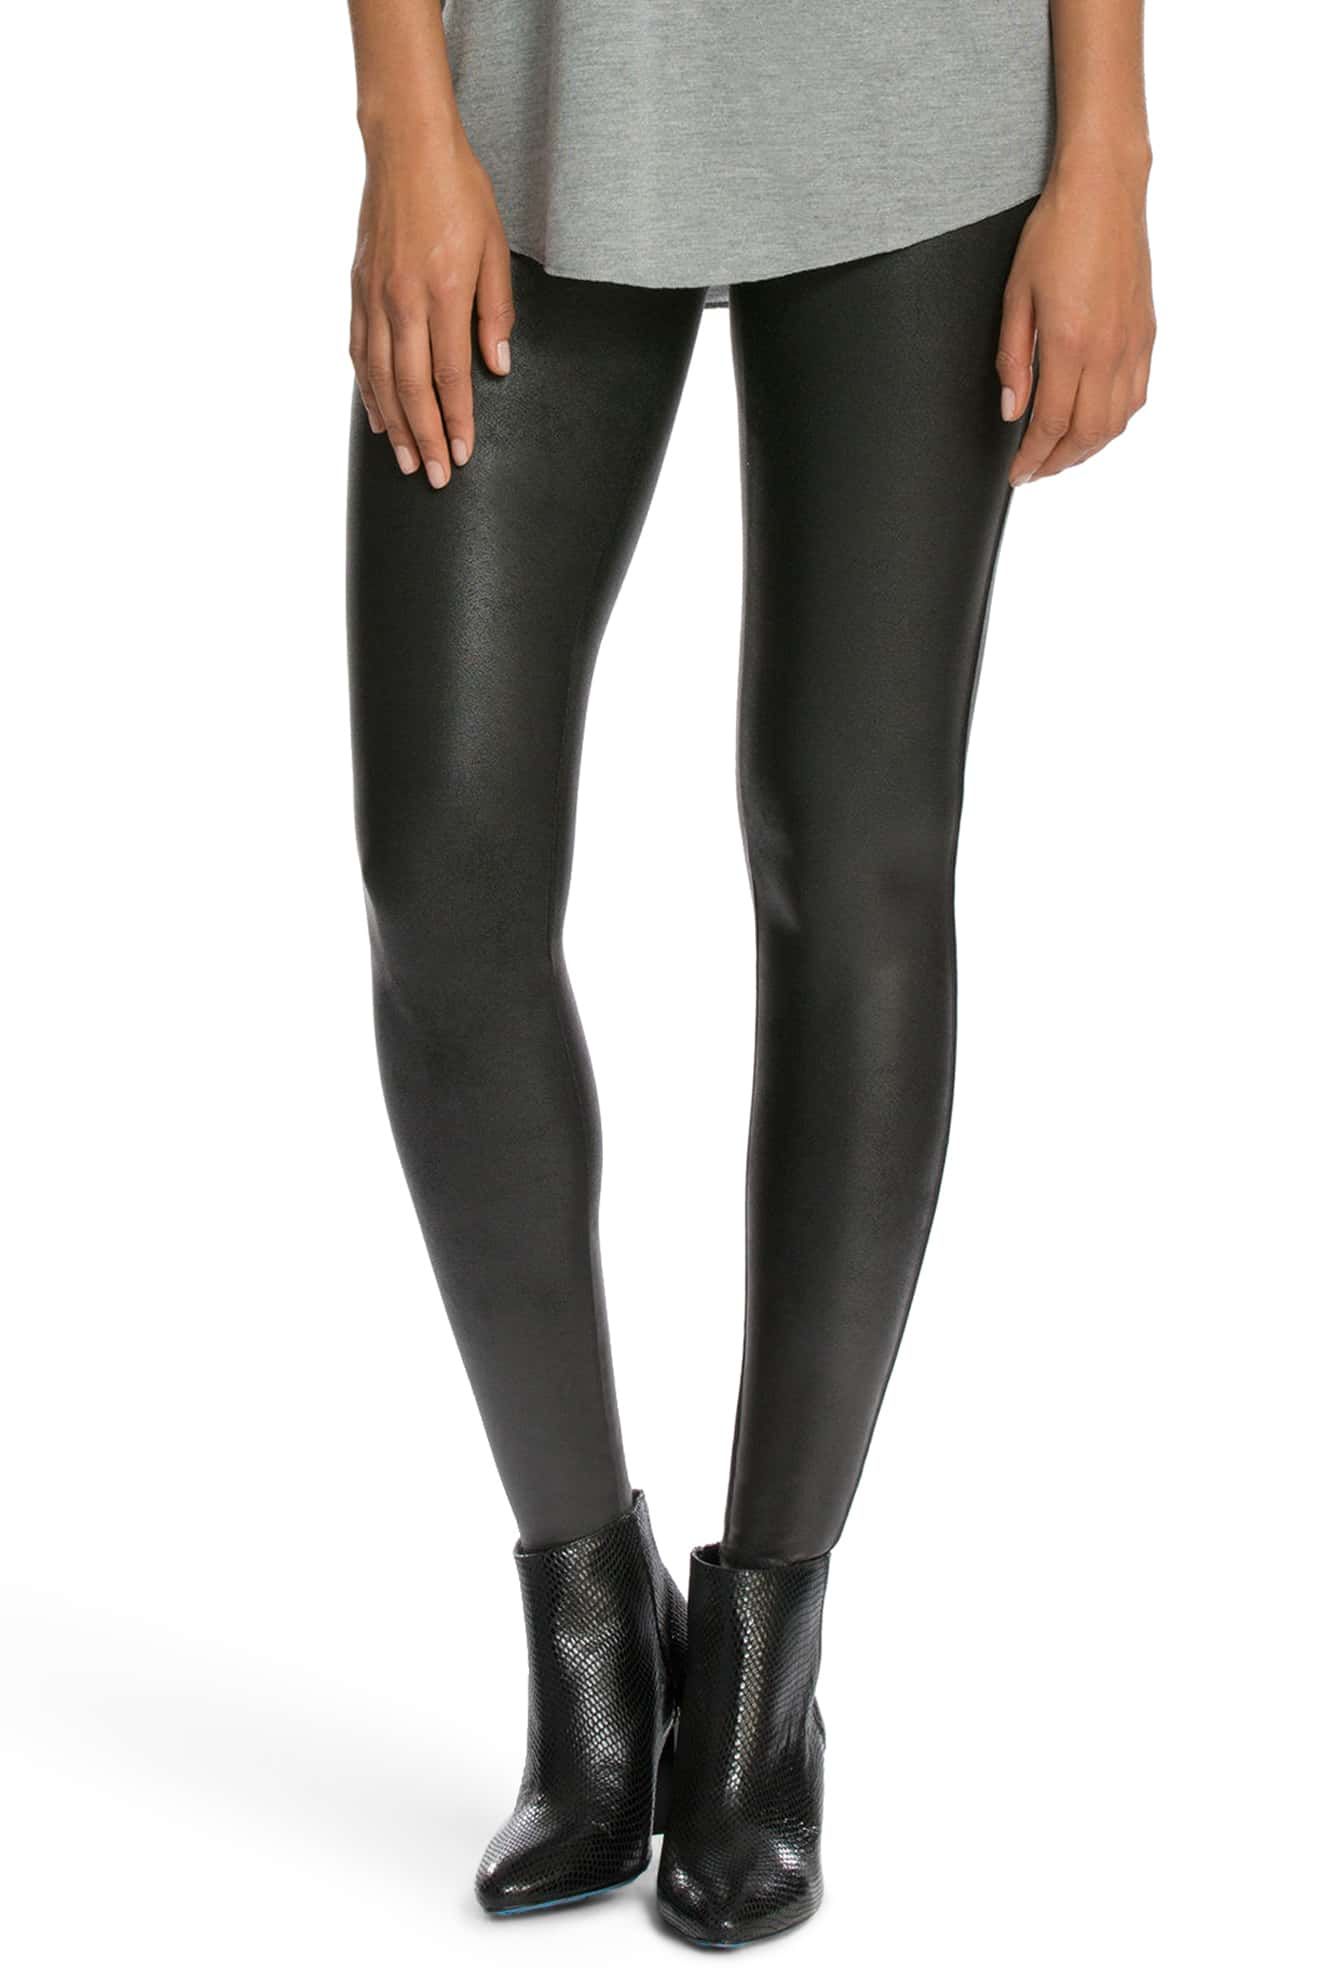 Spanx Faux Leather Leggings Review